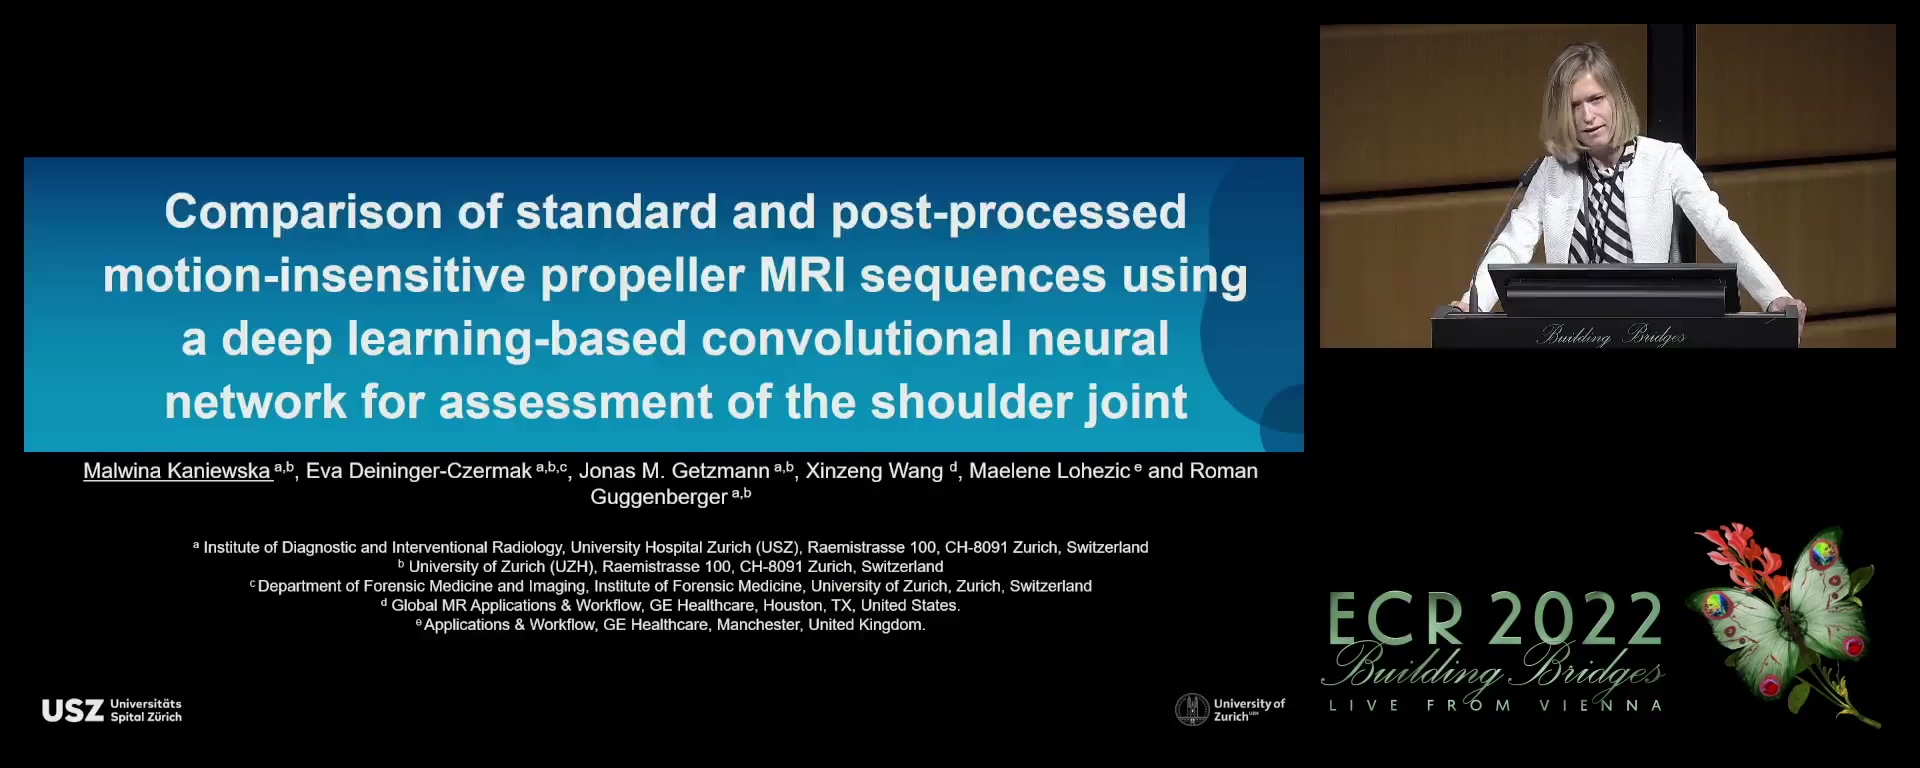 Comparison of standard and post-processed motion-insensitive propeller MRI sequences using a deep learning-based convolutional neural network for assessment of the shoulder joint